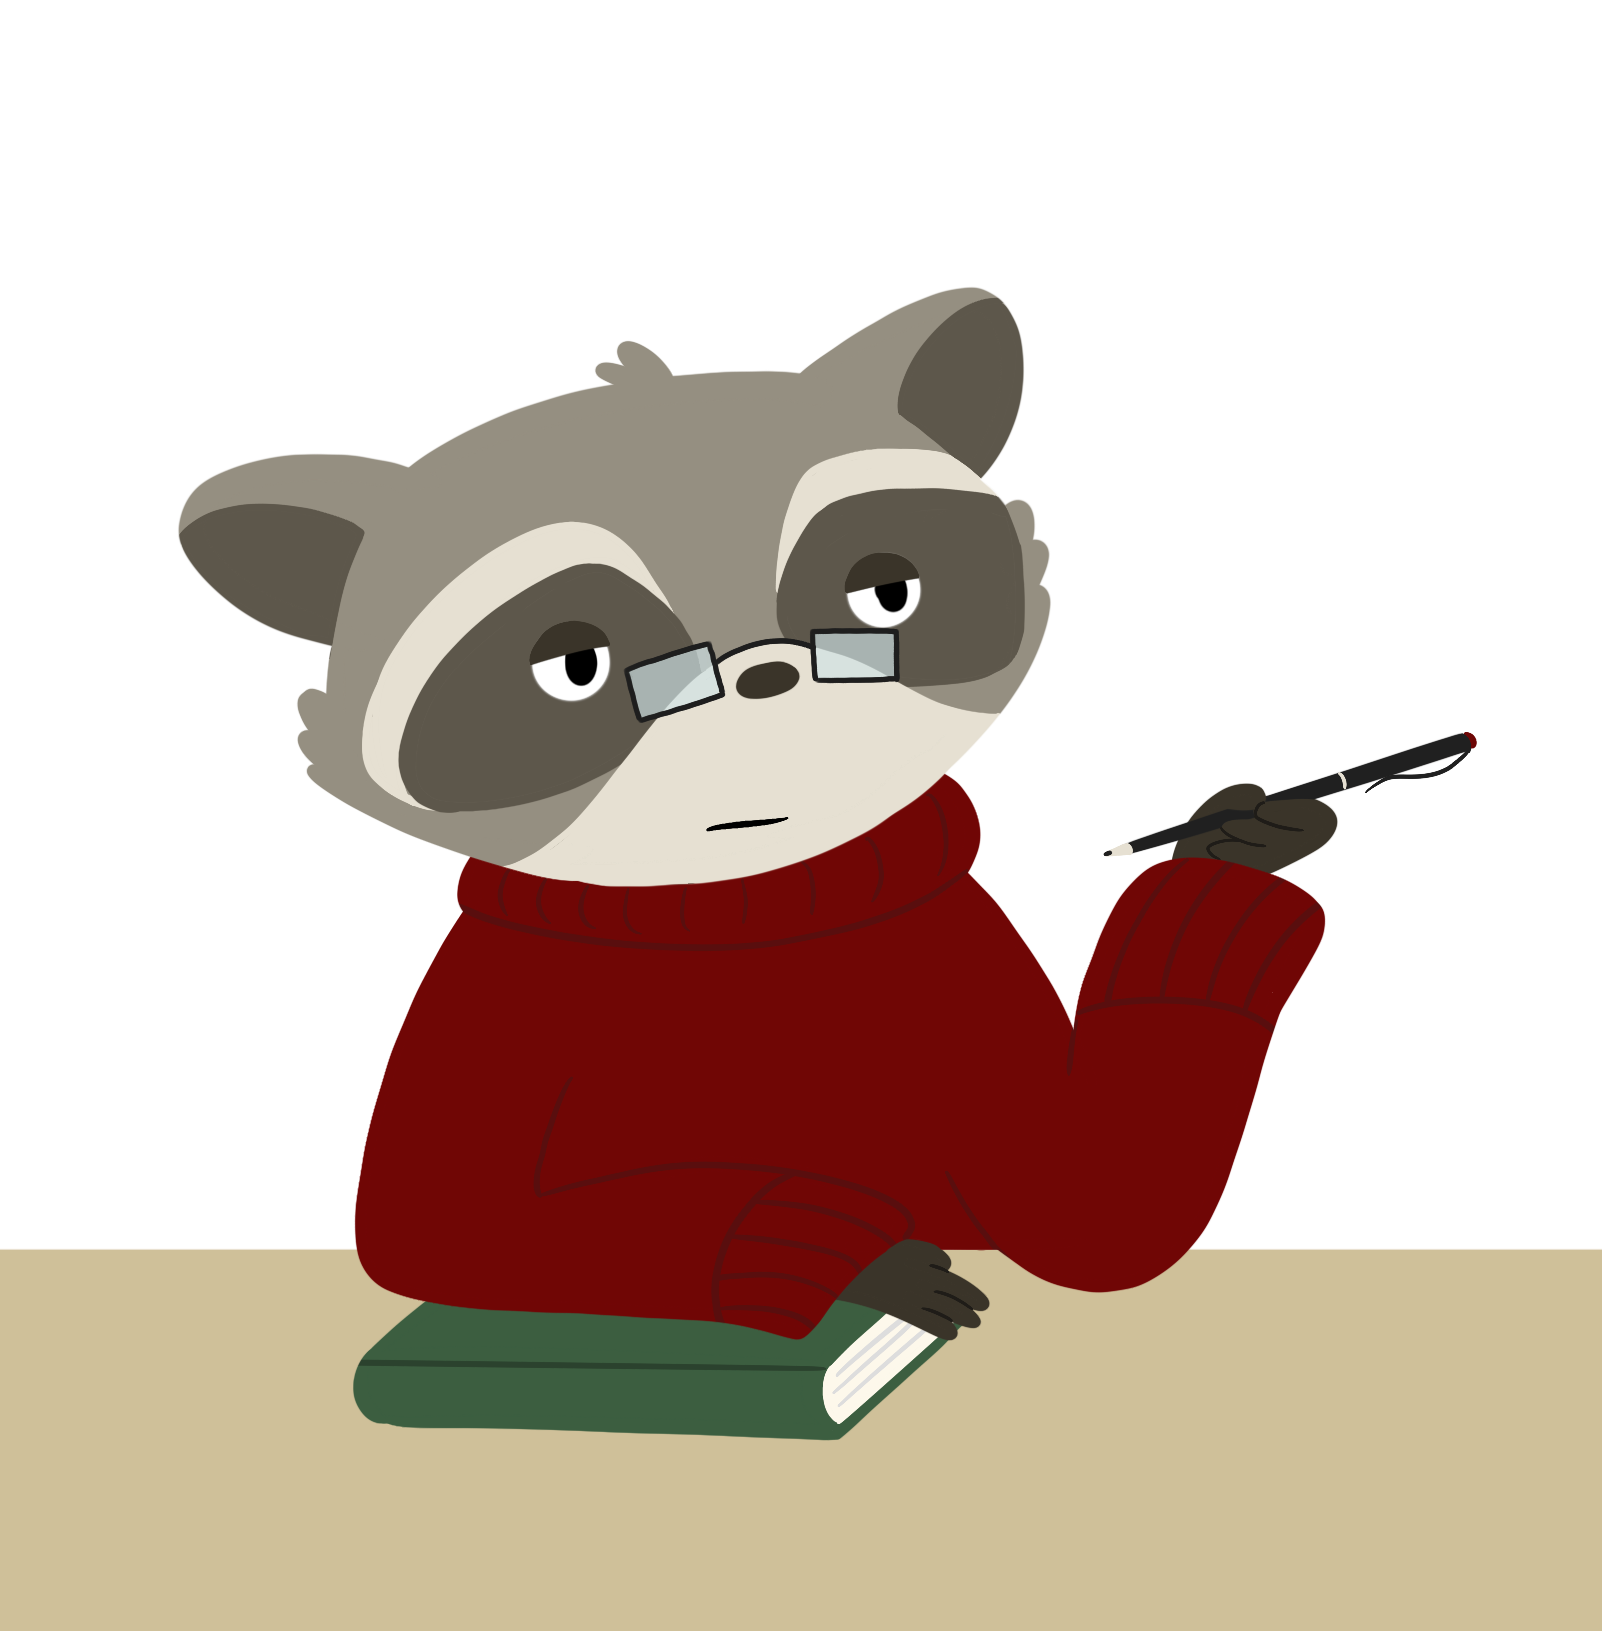 A pensive raccoon sitting at a desk with glasses on holding a pen